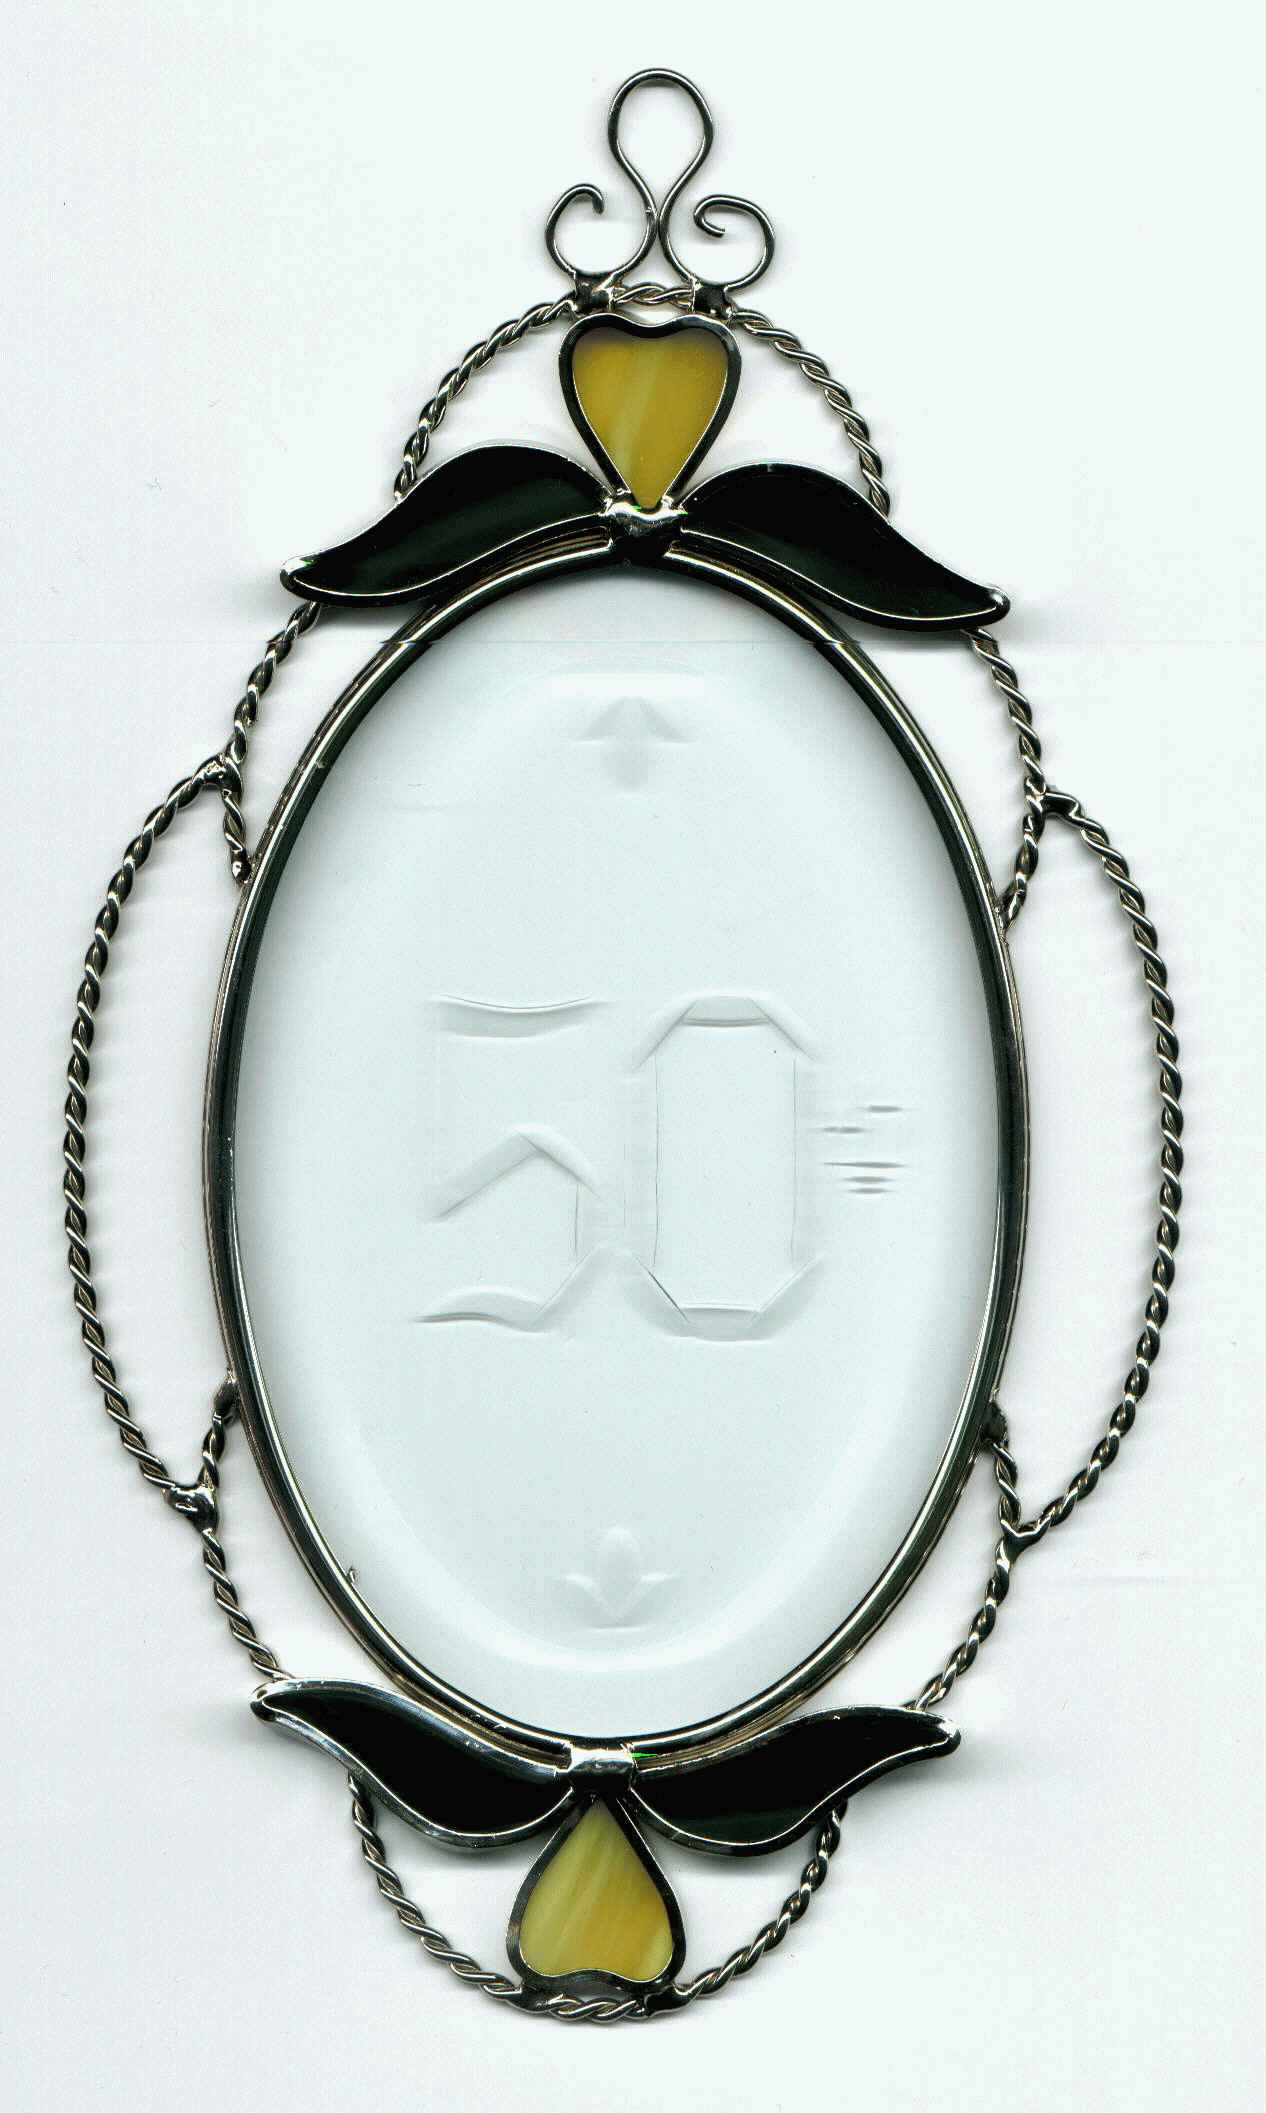 50th Anniversary Etched Oval - Personalize it with Names and a Message